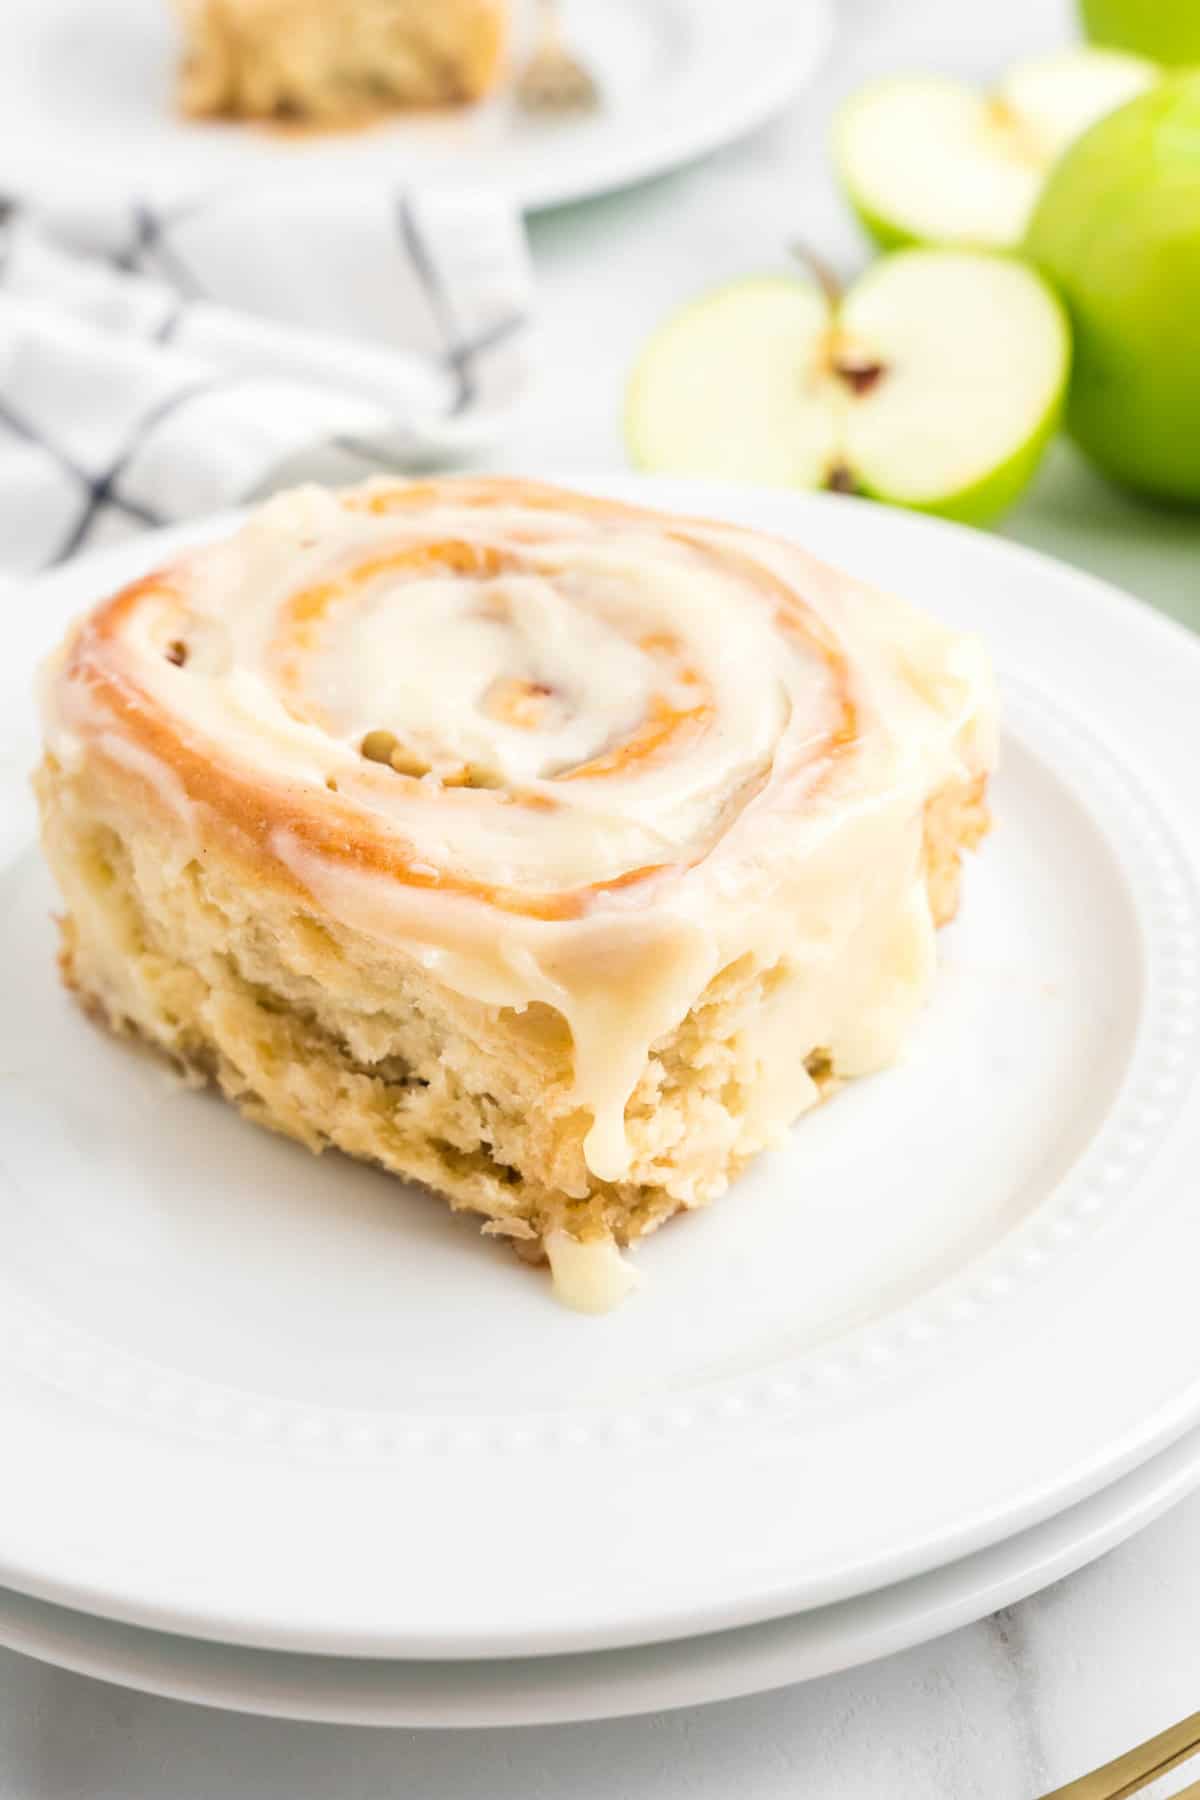 Frosted Apple Cinnamon Roll on plate close up